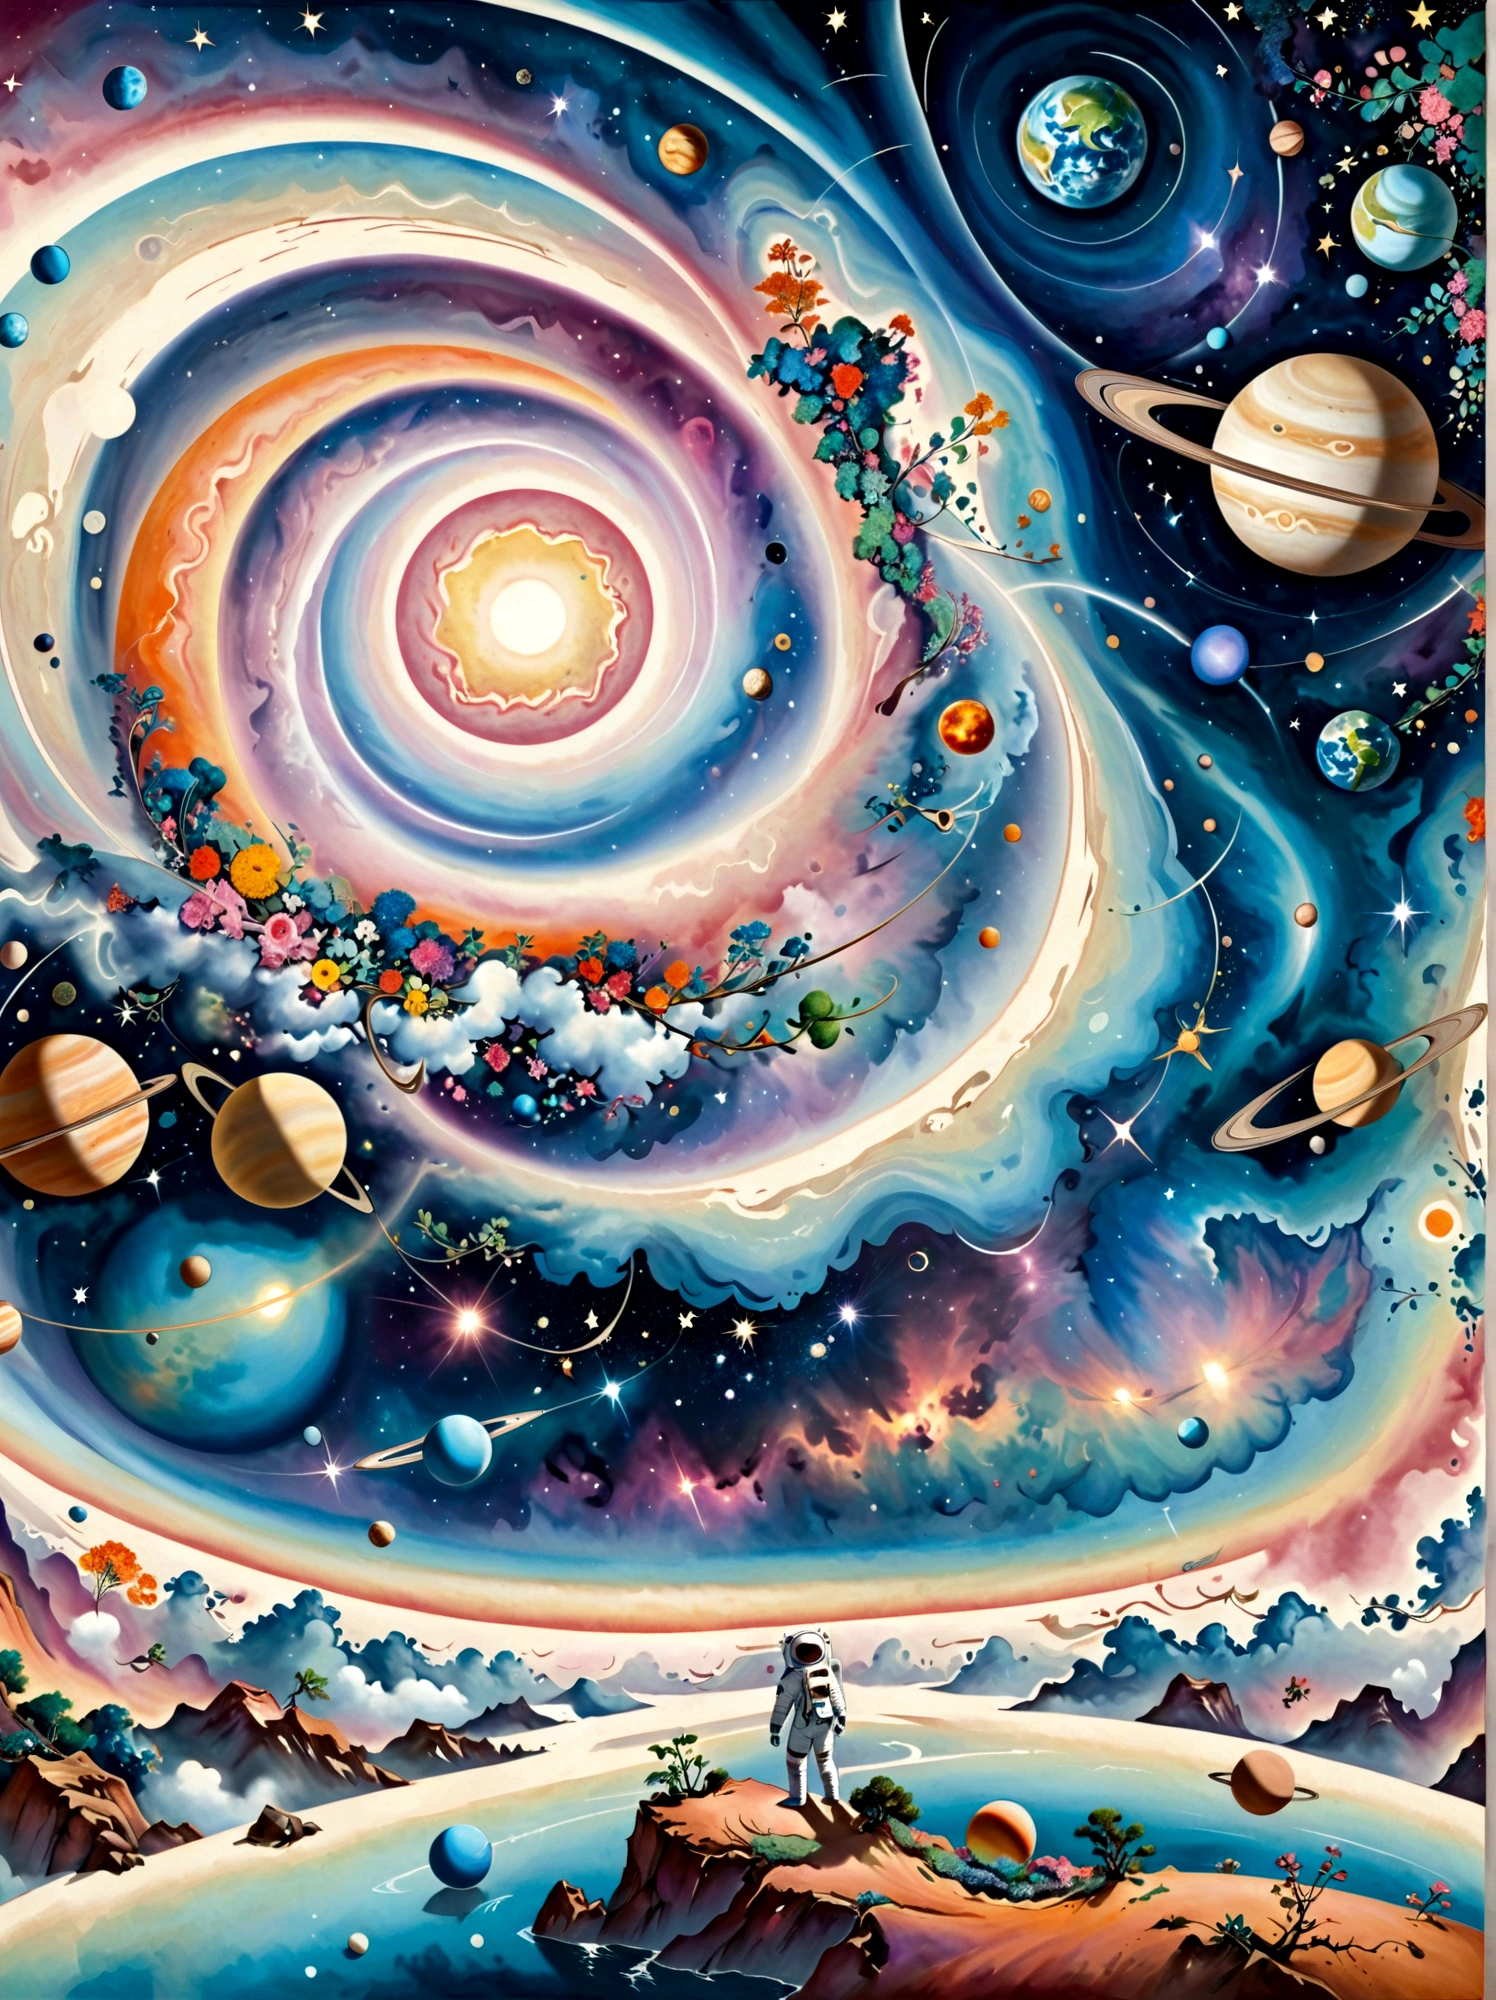 Imagine a surreal perspective of space exploration. There's an astronaut on an abstract shaped planet with swirling colors of cosmic nebulas in the backdrop. A closer look reveals strange flora and fauna, resembling but not quite matching Earth's. The astronaut is tethered to a whimsically curved spacecraft that seems to defy the physics we know. Rings of planets and orbs of sparkling astral dust form asymmetrical patterns across the sky. This visualization is heavily influenced by the abstract and dreamlike qualities seen in the Surrealism movement of the late 19th and early 20th century.